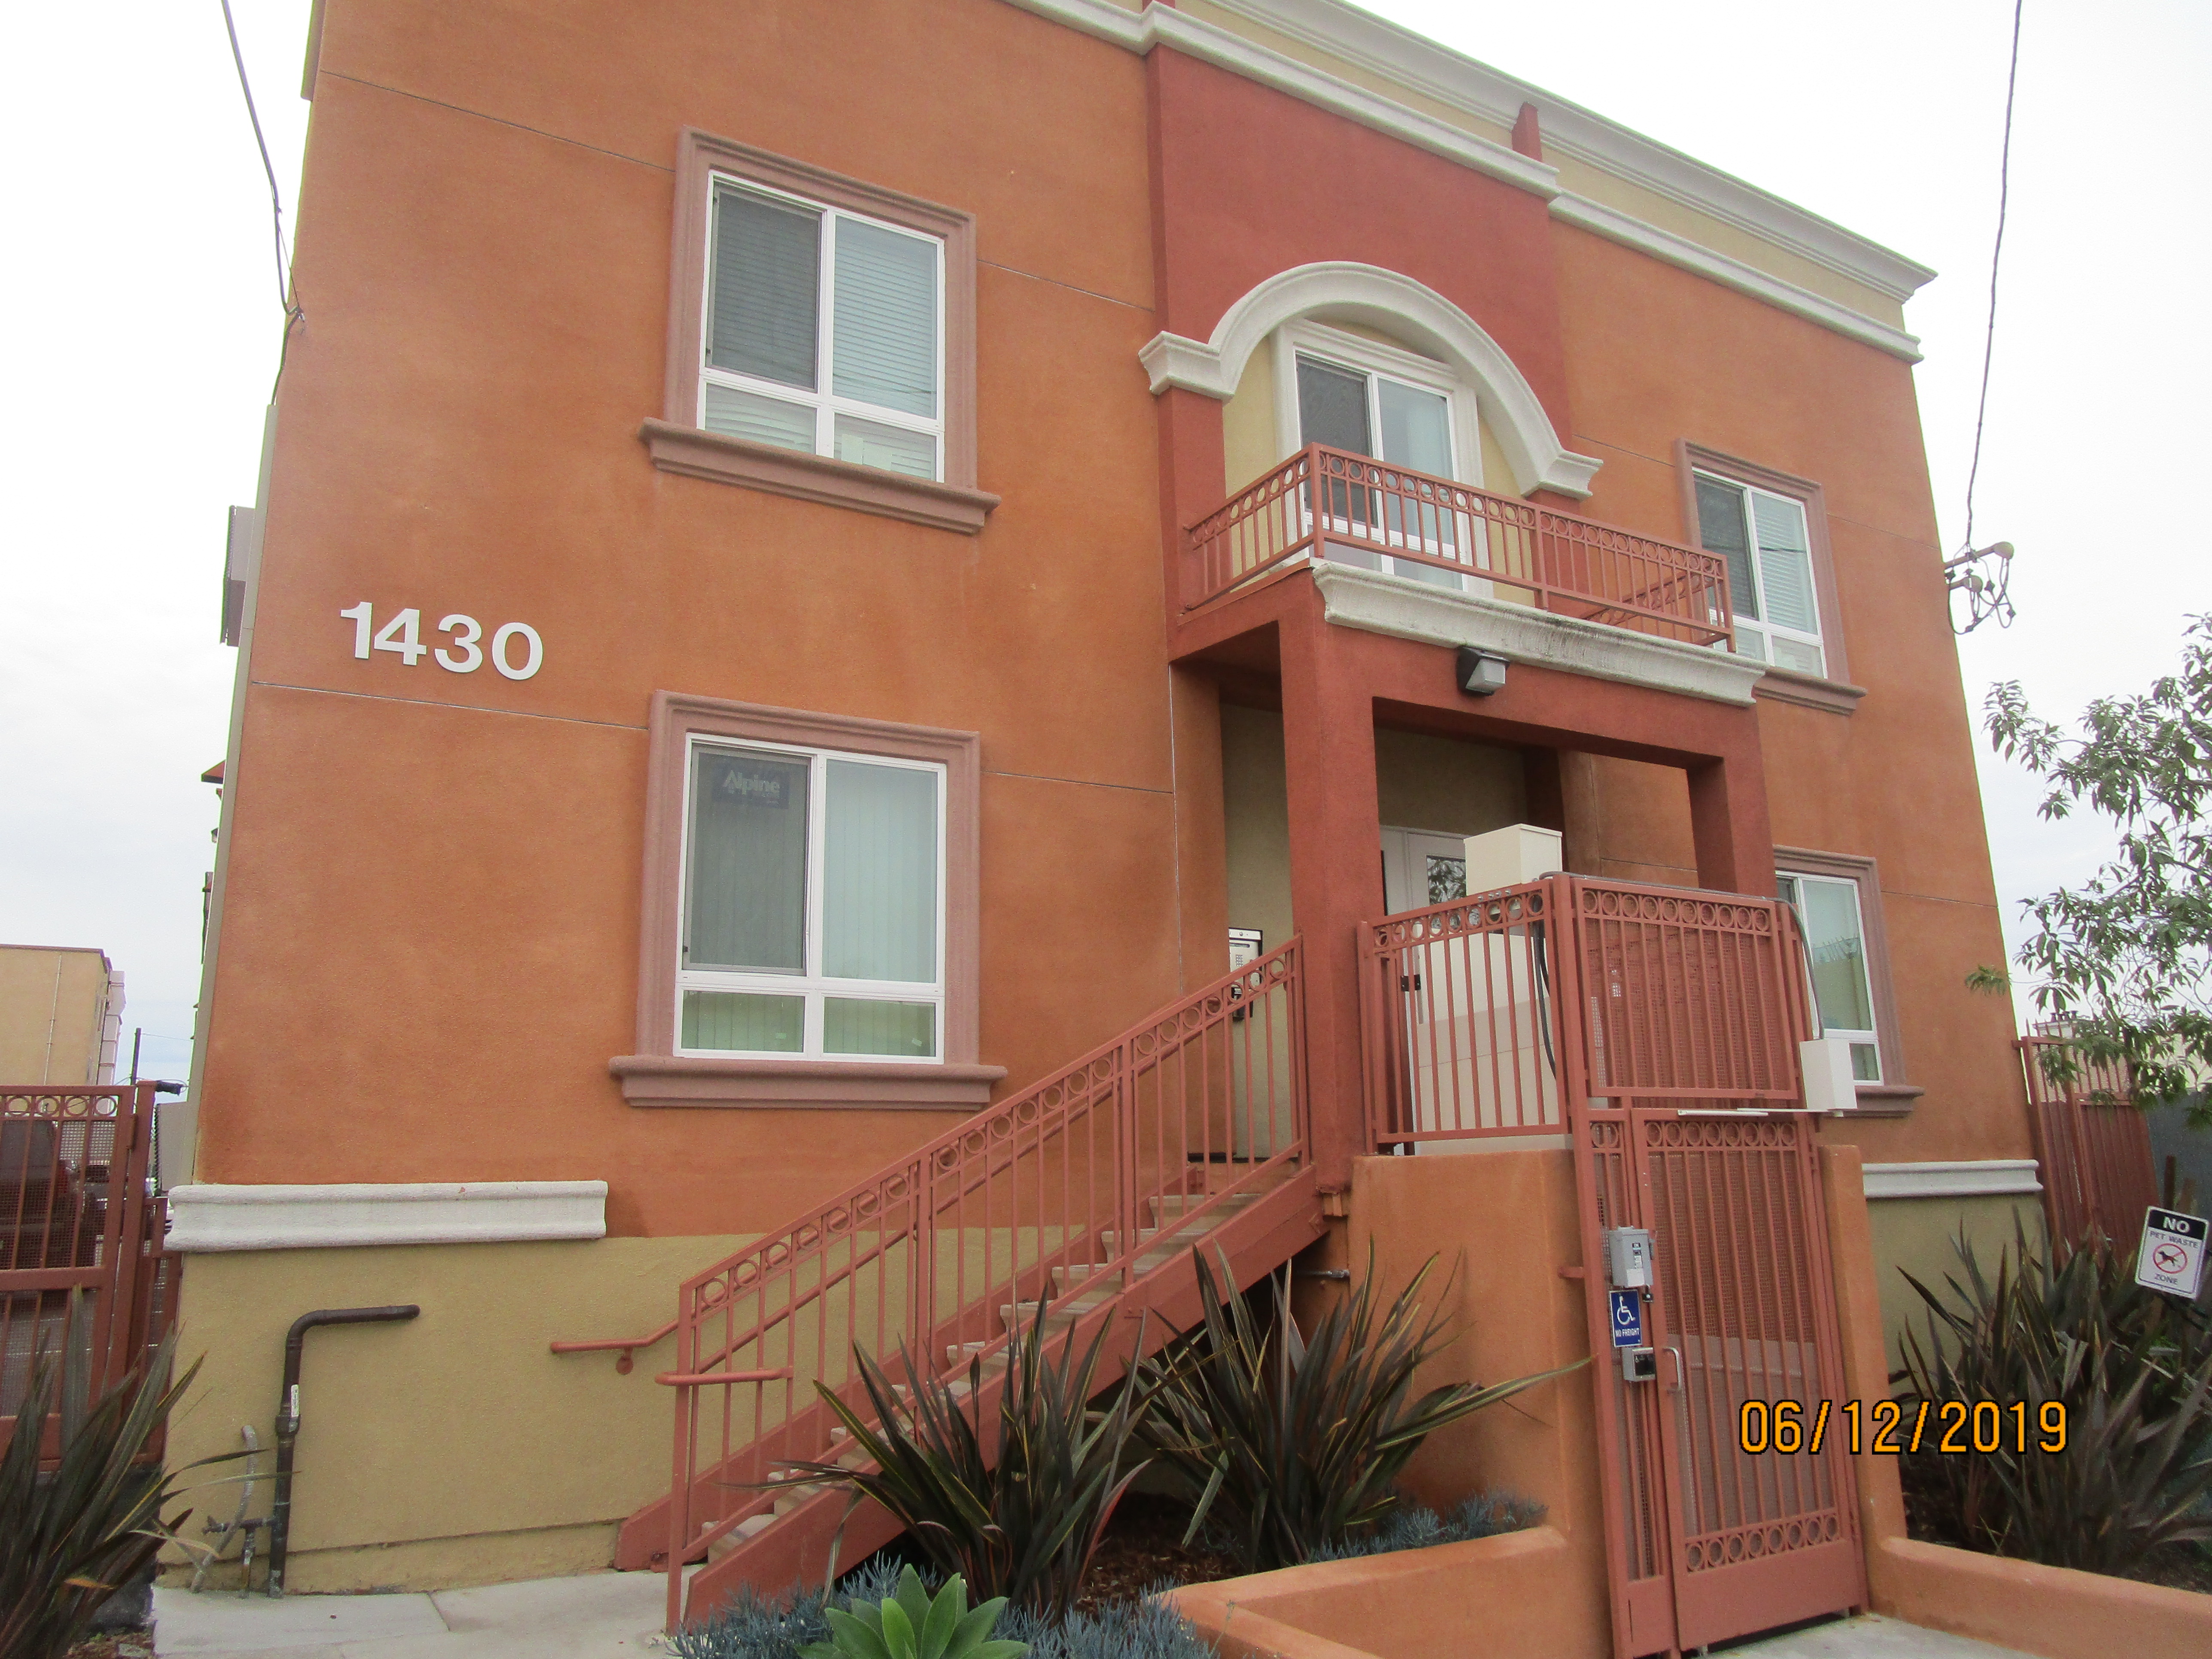 Side view of a colorful two story building entrance, steps with a handrail on one side, a lock door entrance to a ramp, five windows, a middle window with a balcony, bushes and plants.